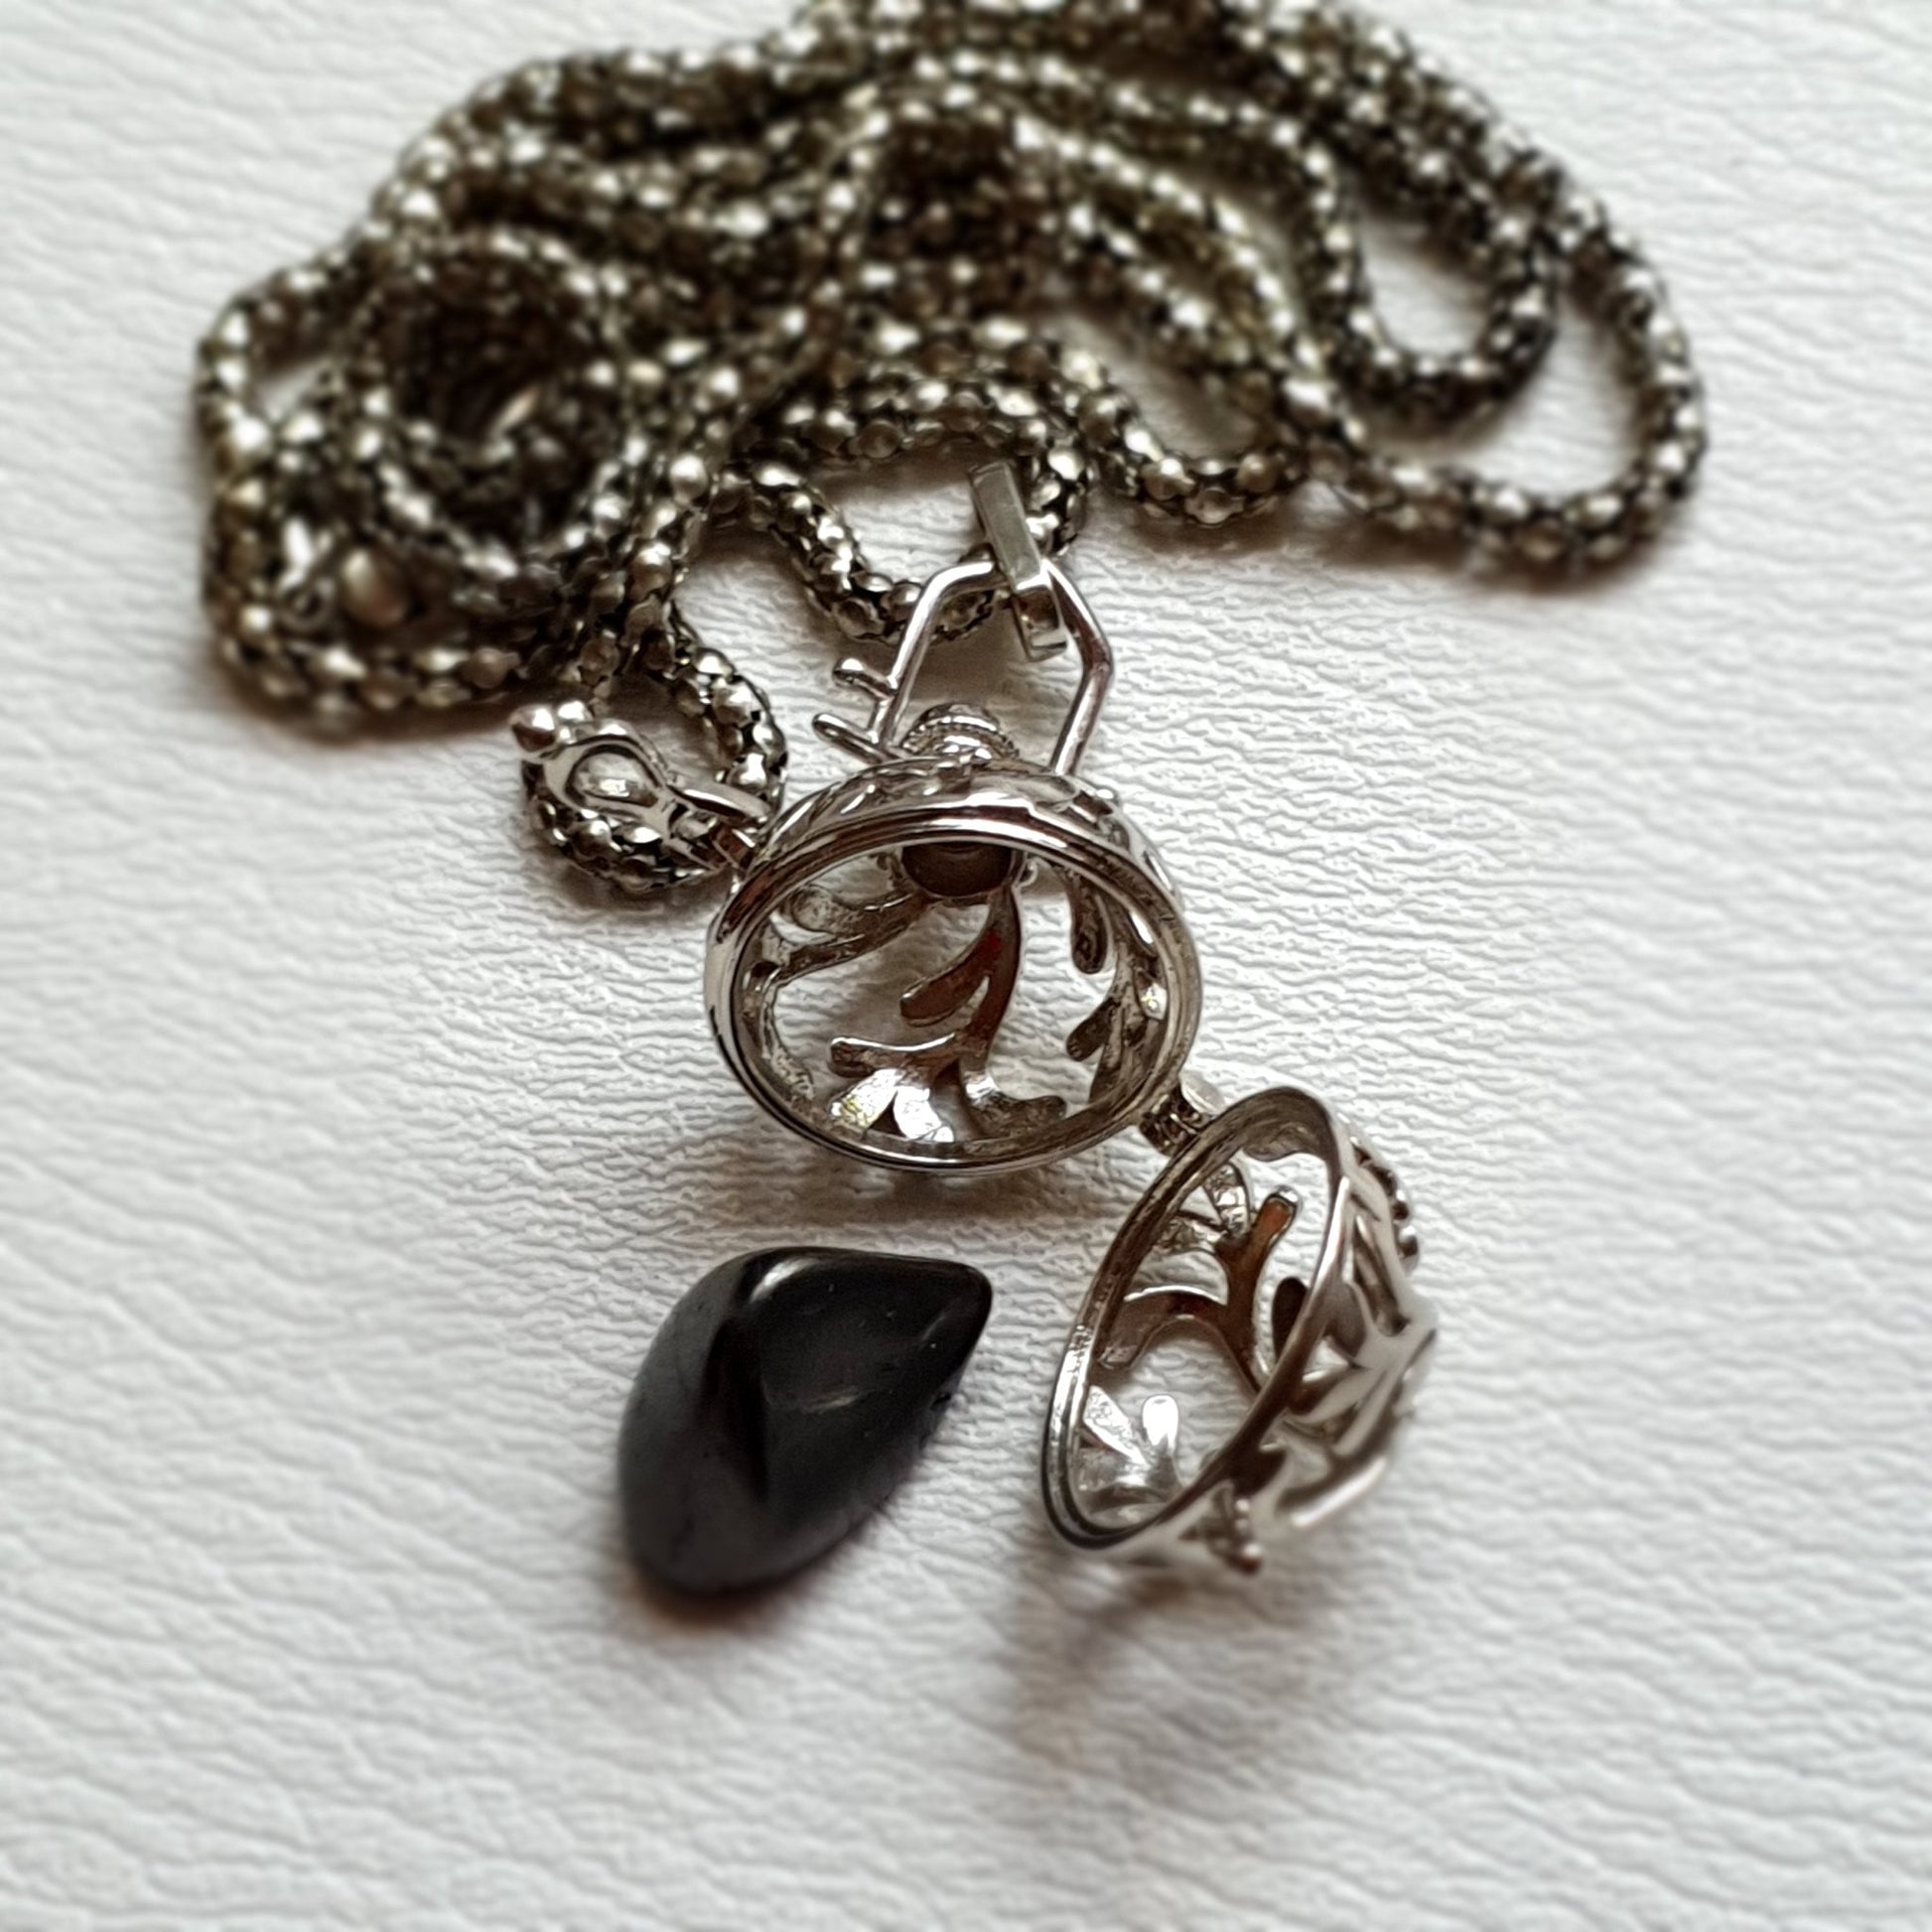 Silver pendant necklace with Shungite crystal - Healthi Choice